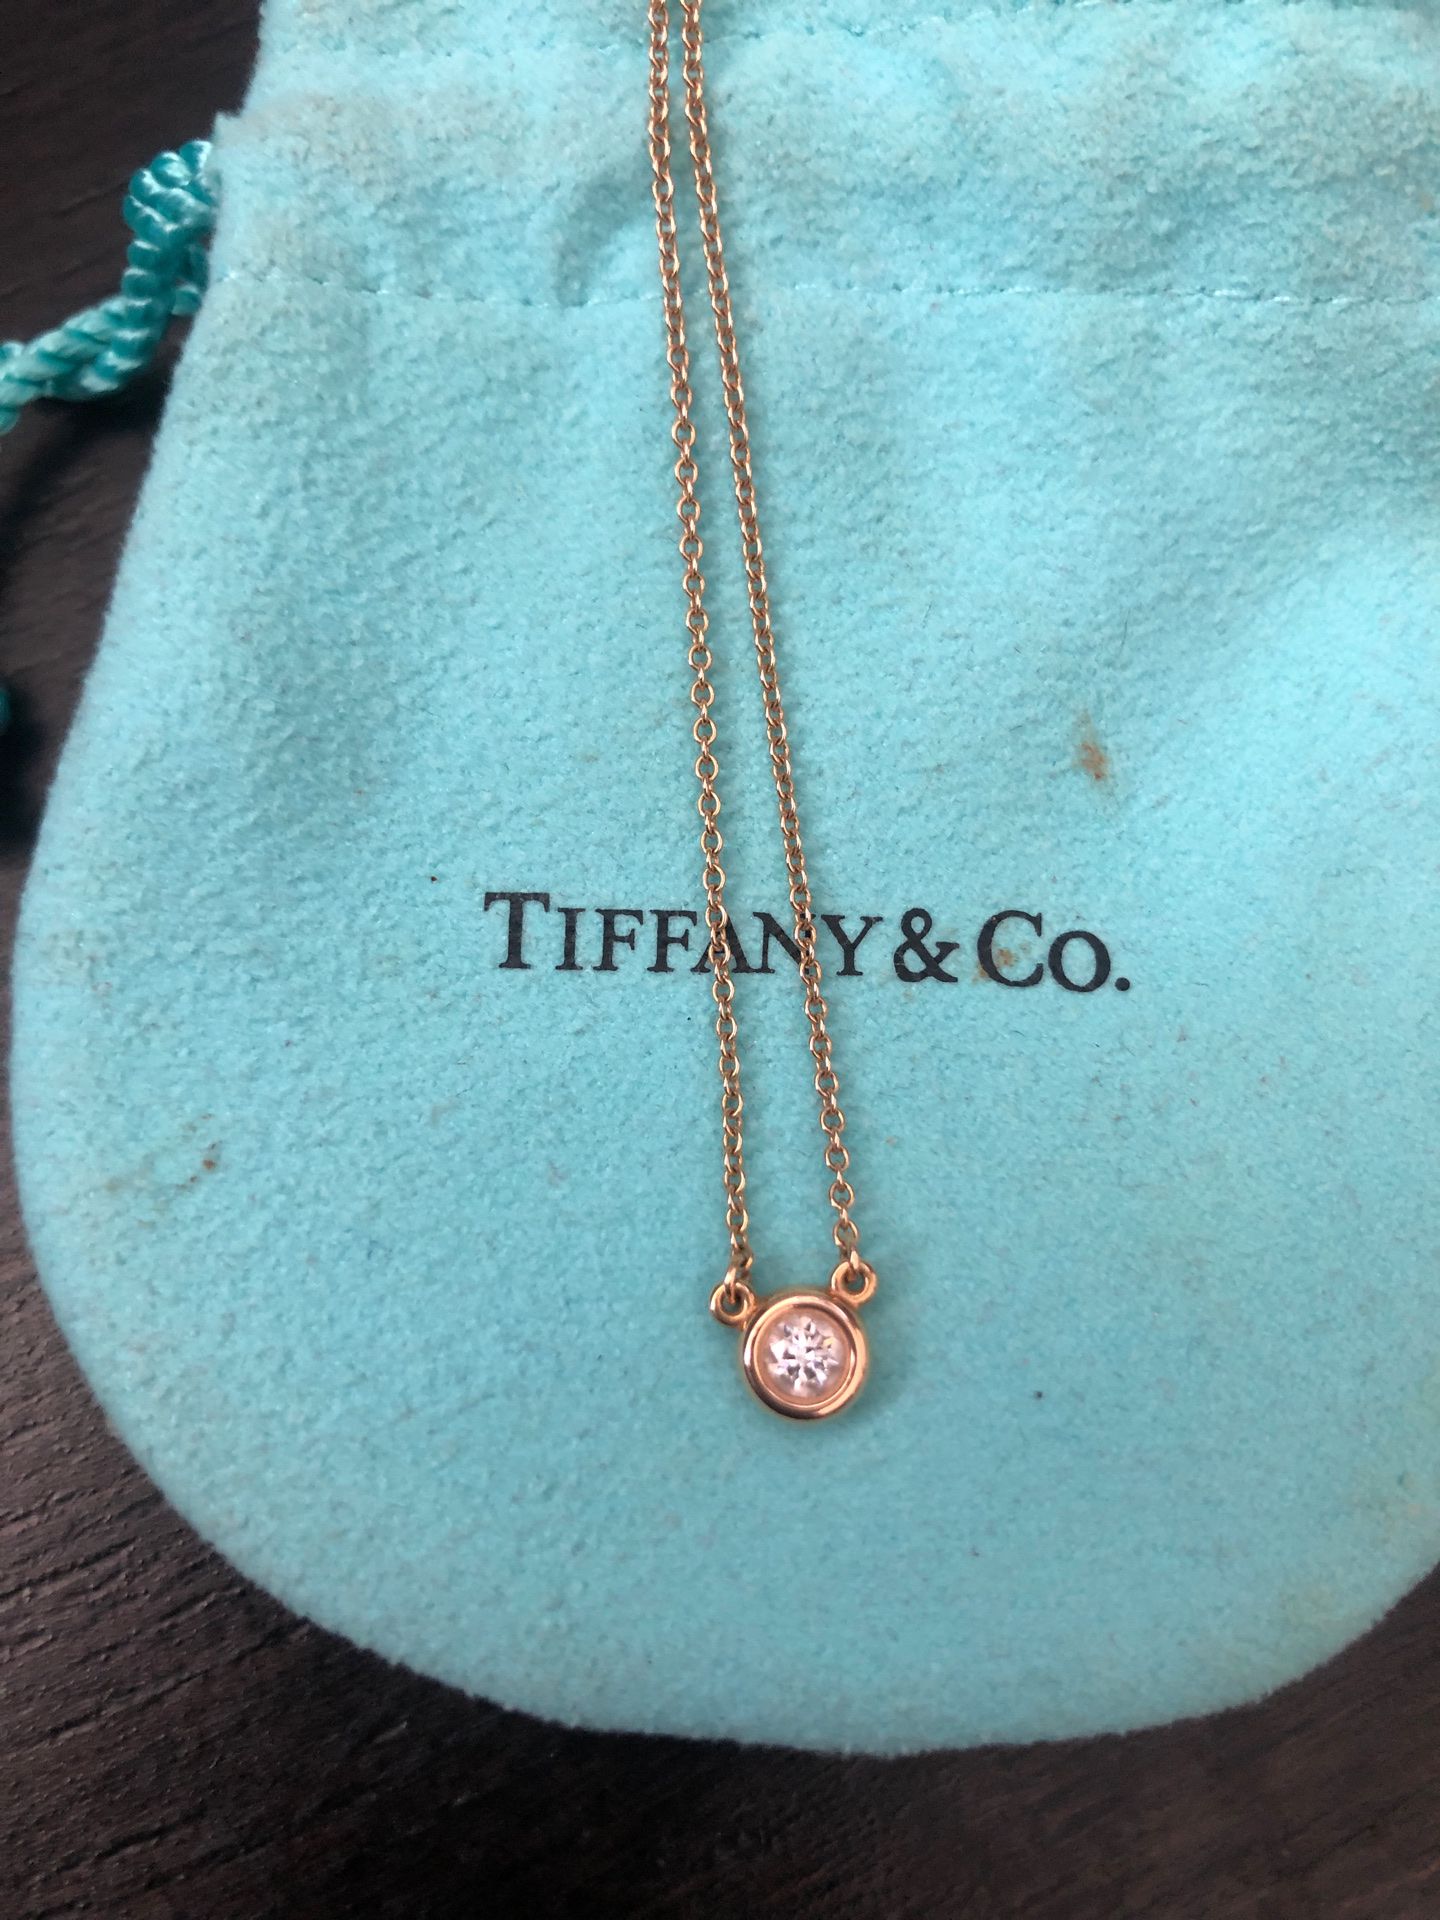 Tiffany&co pendant necklace in yellow Gold